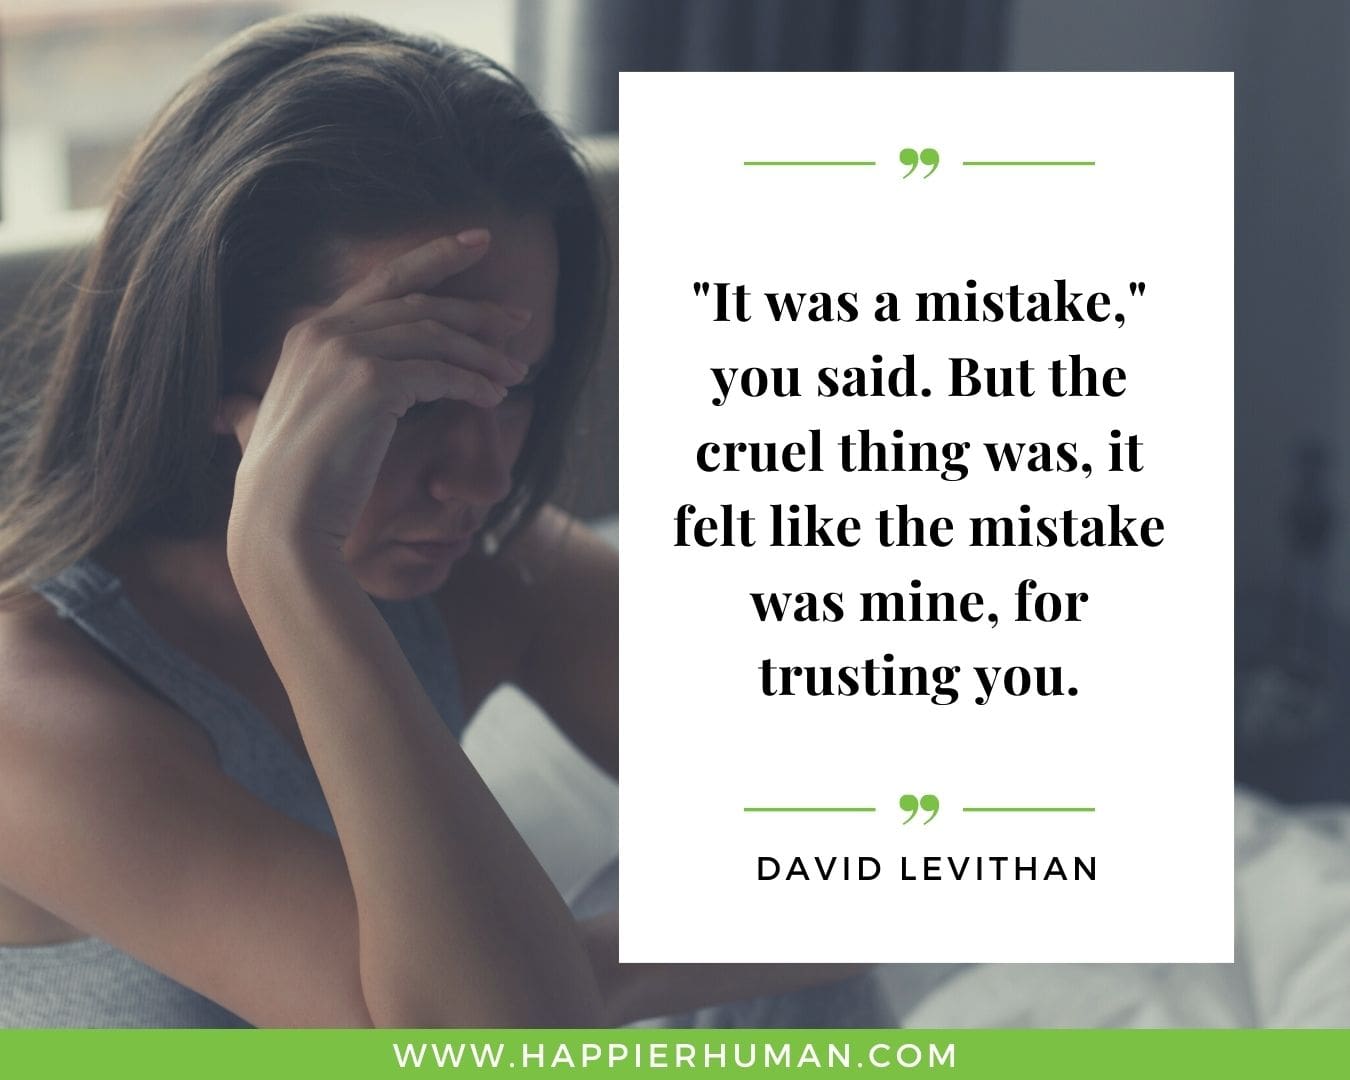 Broken Trust Quotes - “It was a mistake,” you said. But the cruel thing was, it felt like the mistake was mine, for trusting you.” - David Levithan